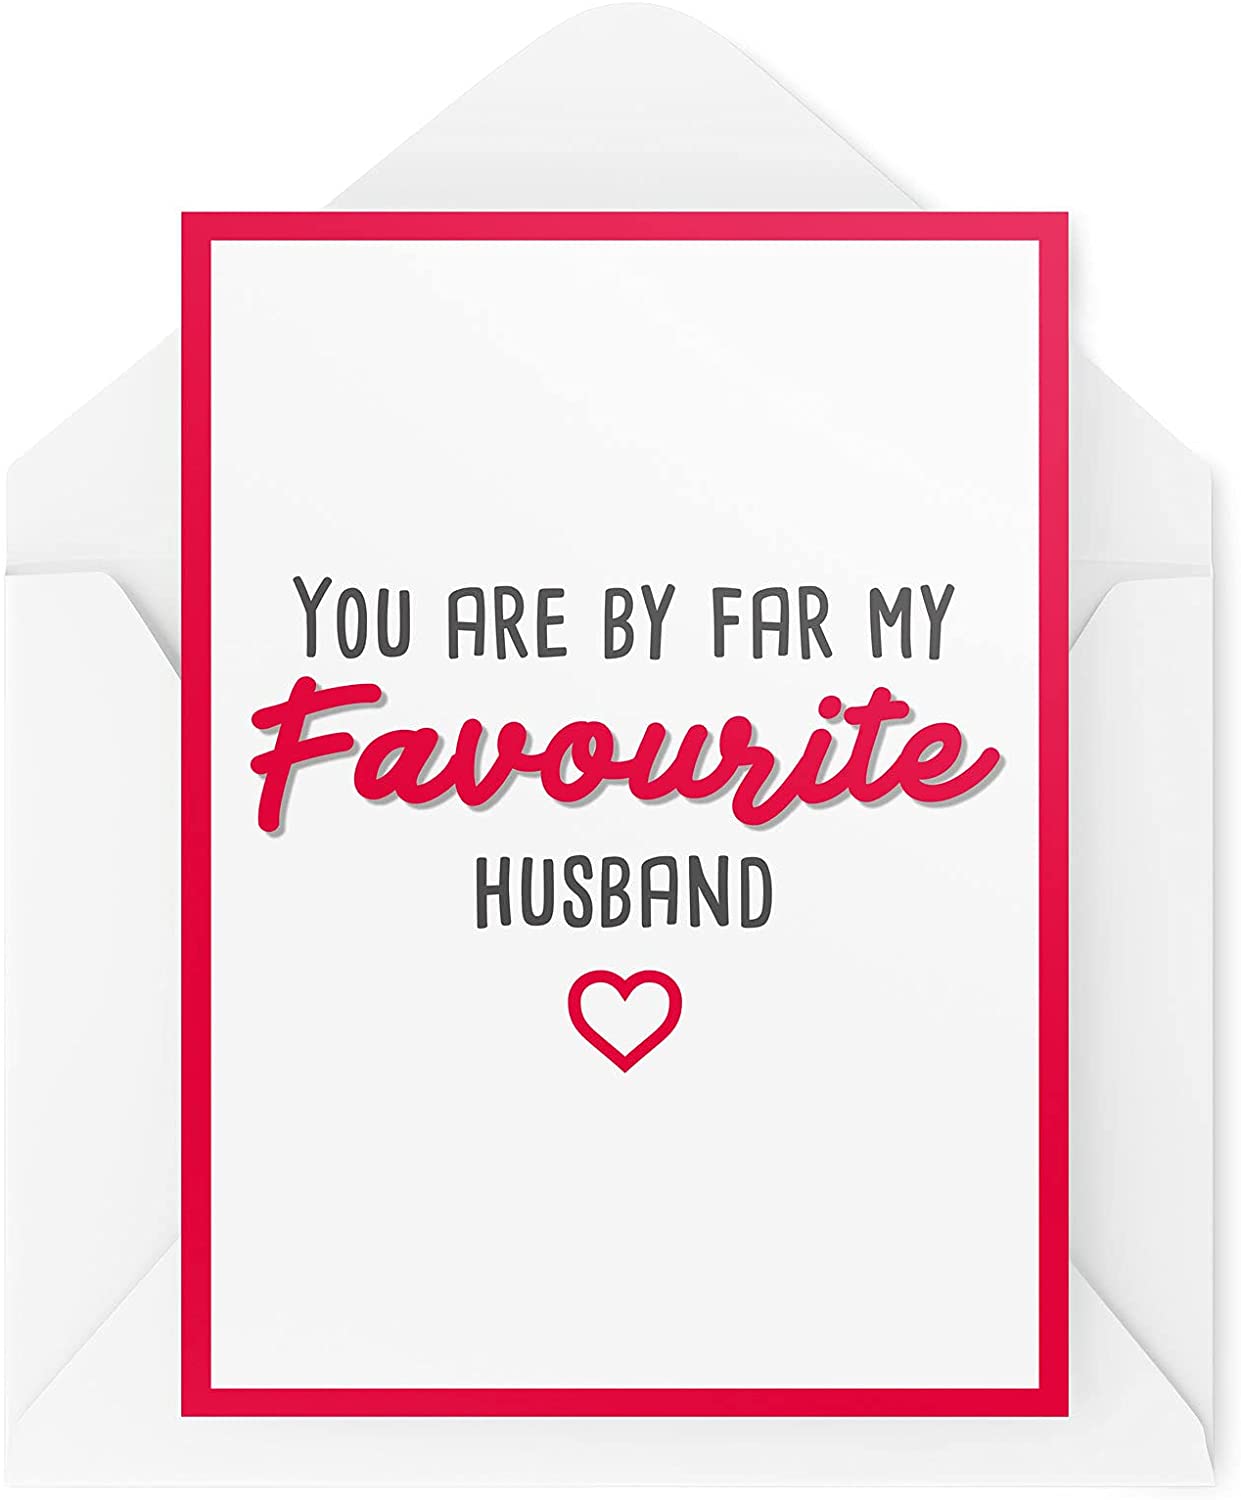 Tongue In Peach You Are By Far My Favourite Husband Joke Card RRP £3.99 CLEARANCE XL £1.99